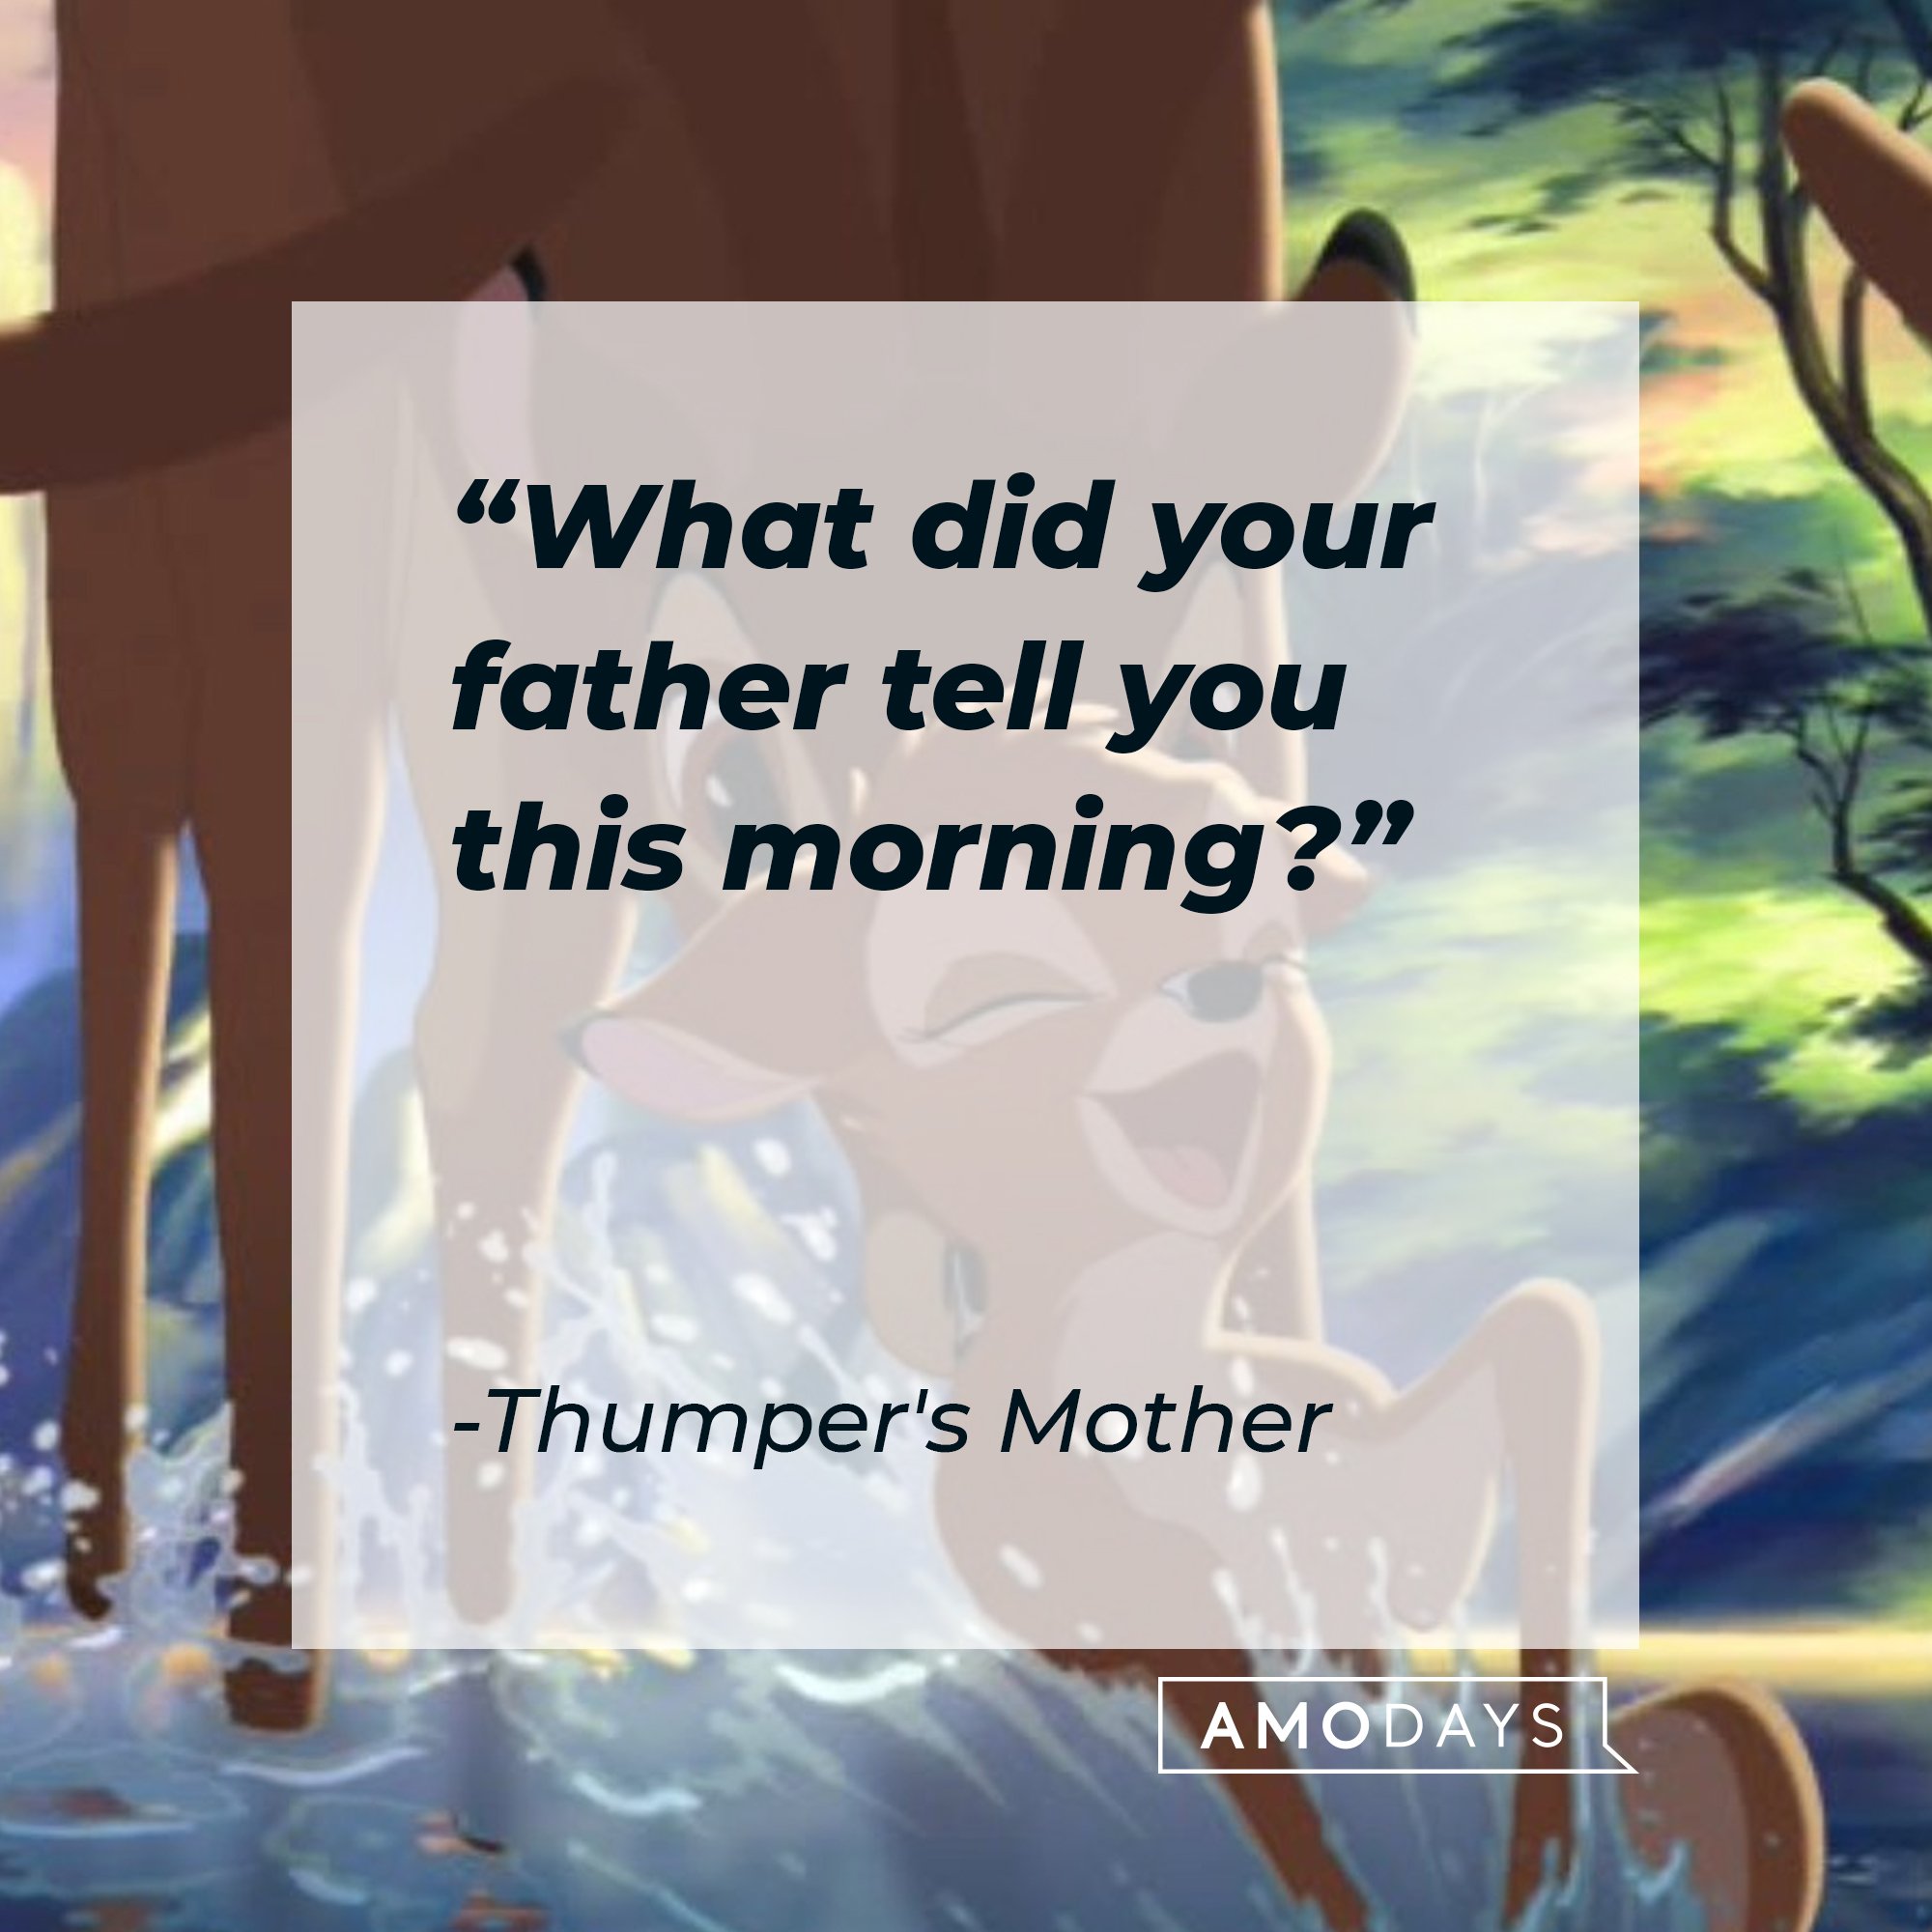 Thumper's Mother's quote "What did your father tell you this morning?" | Source: facebook.com/DisneyBambi